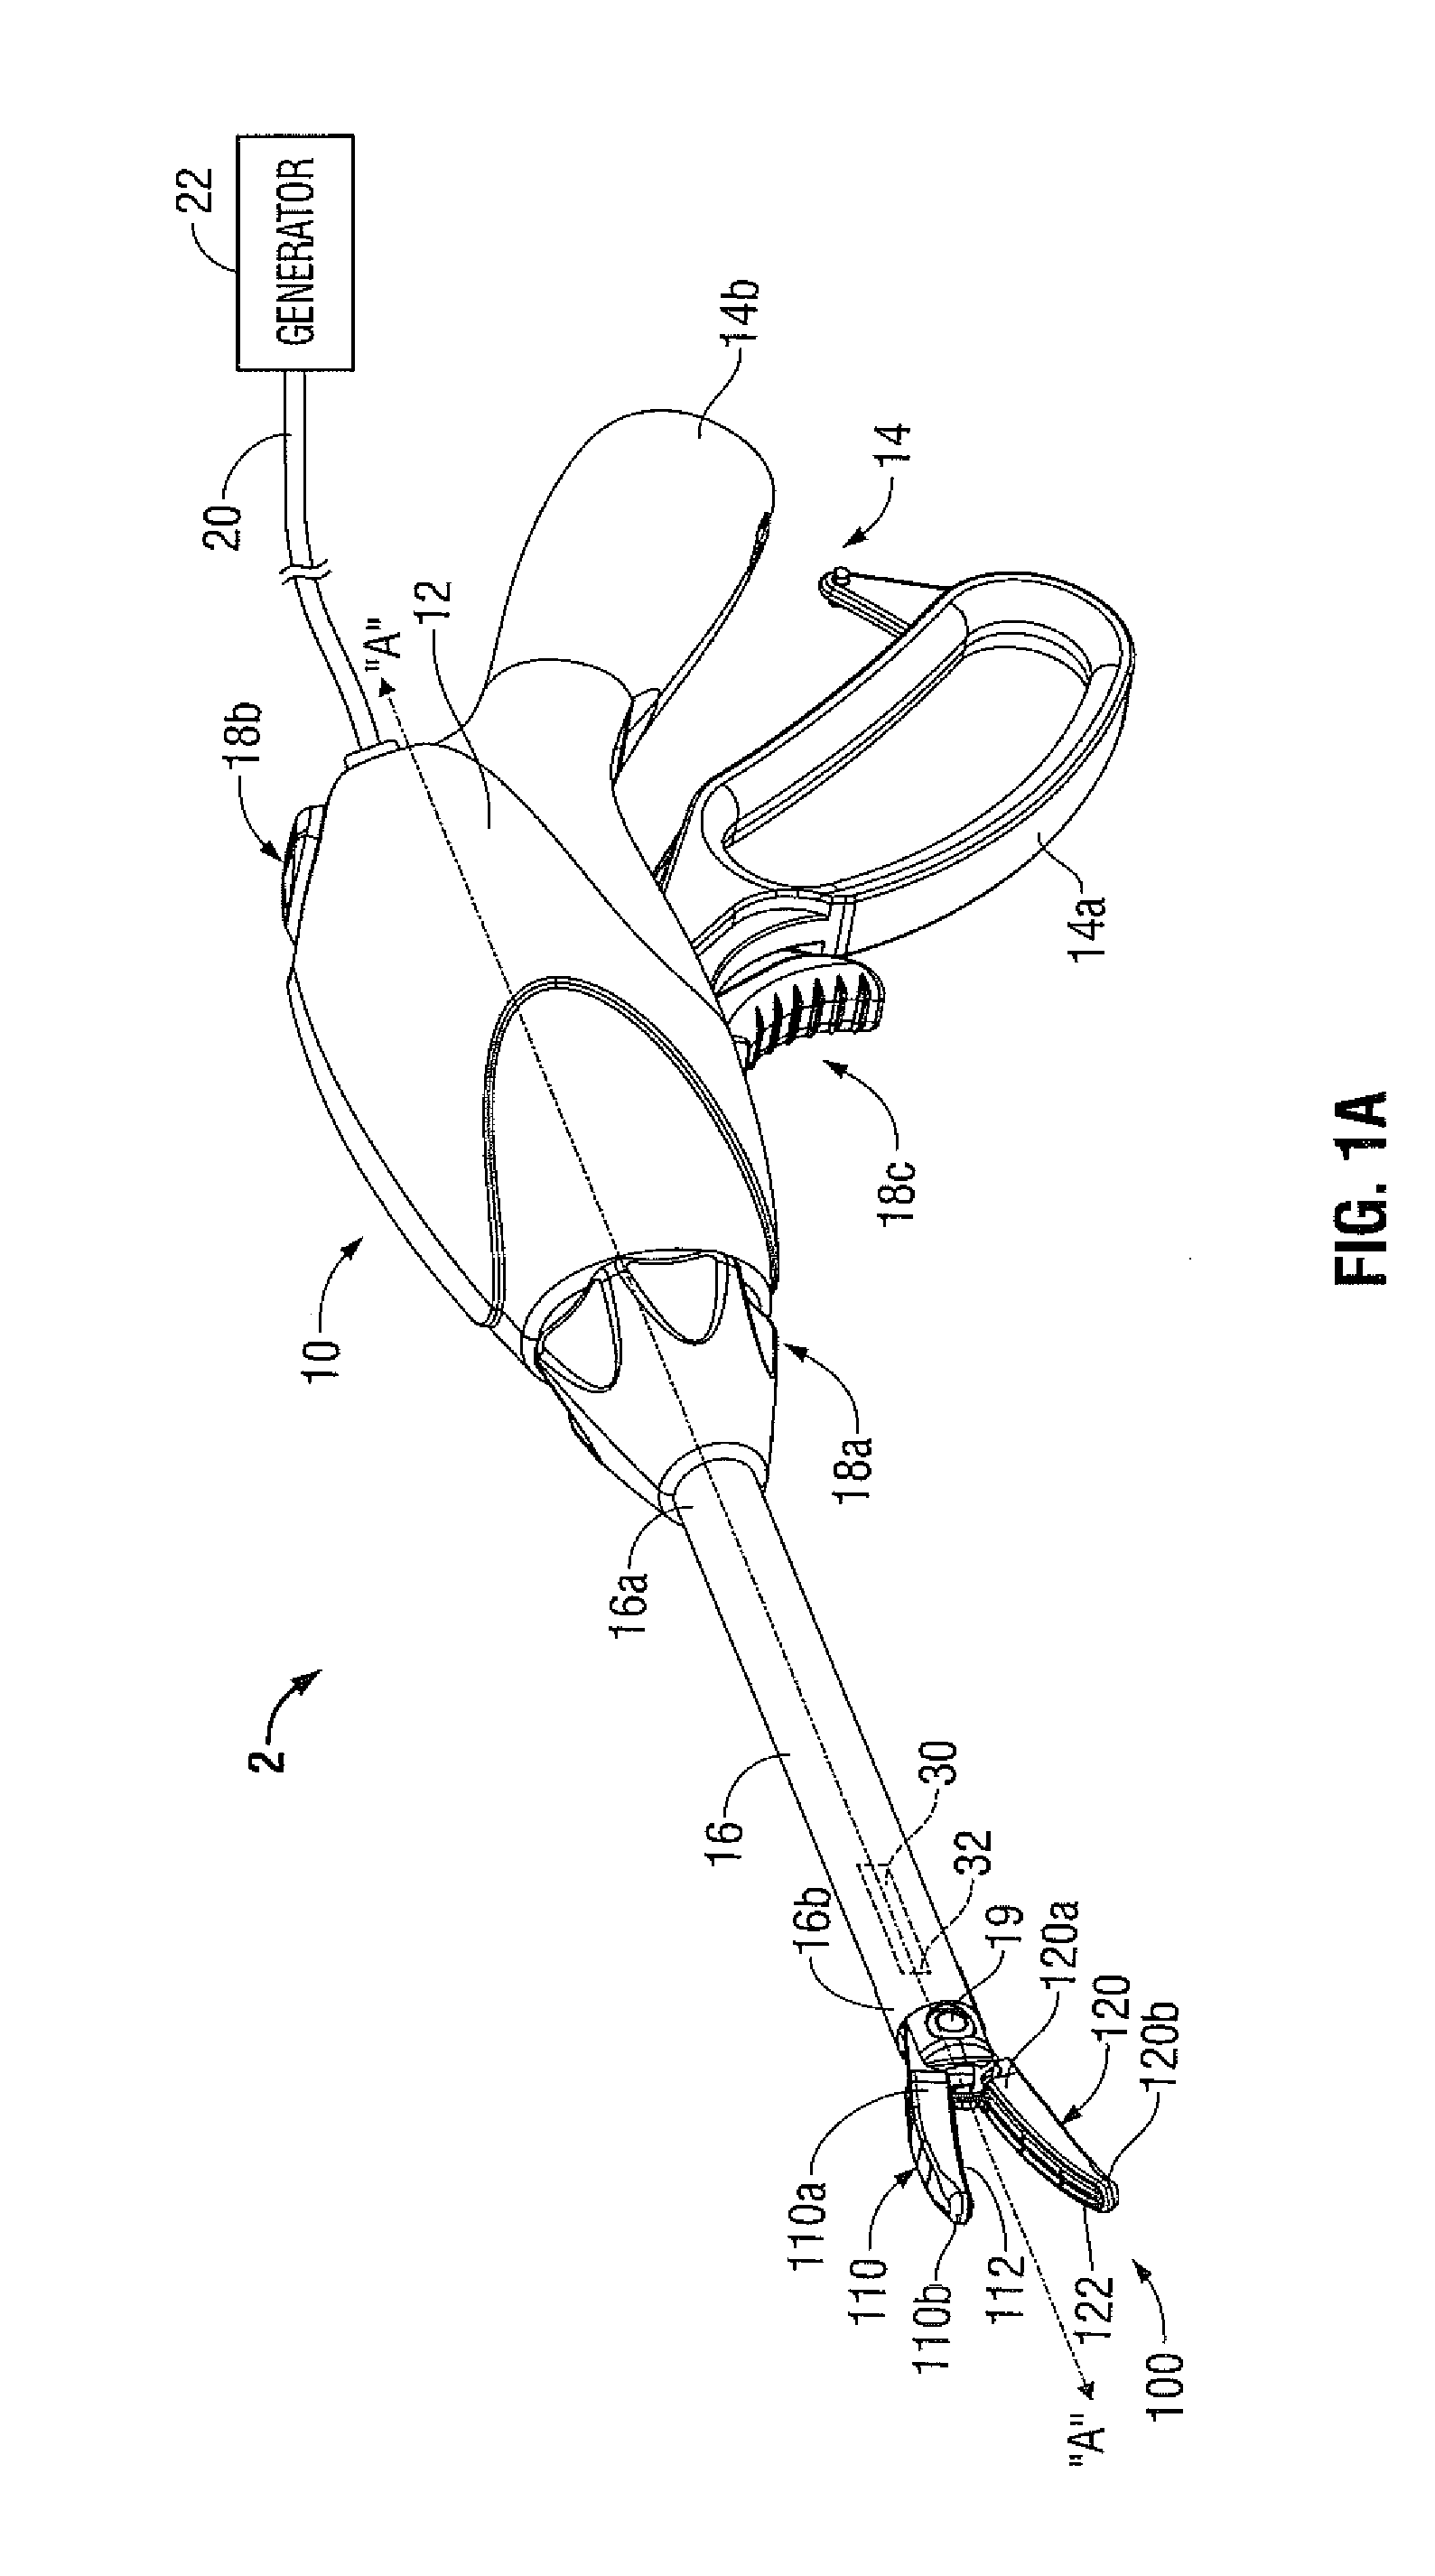 Dielectric Jaw Insert For Electrosurgical End Effector